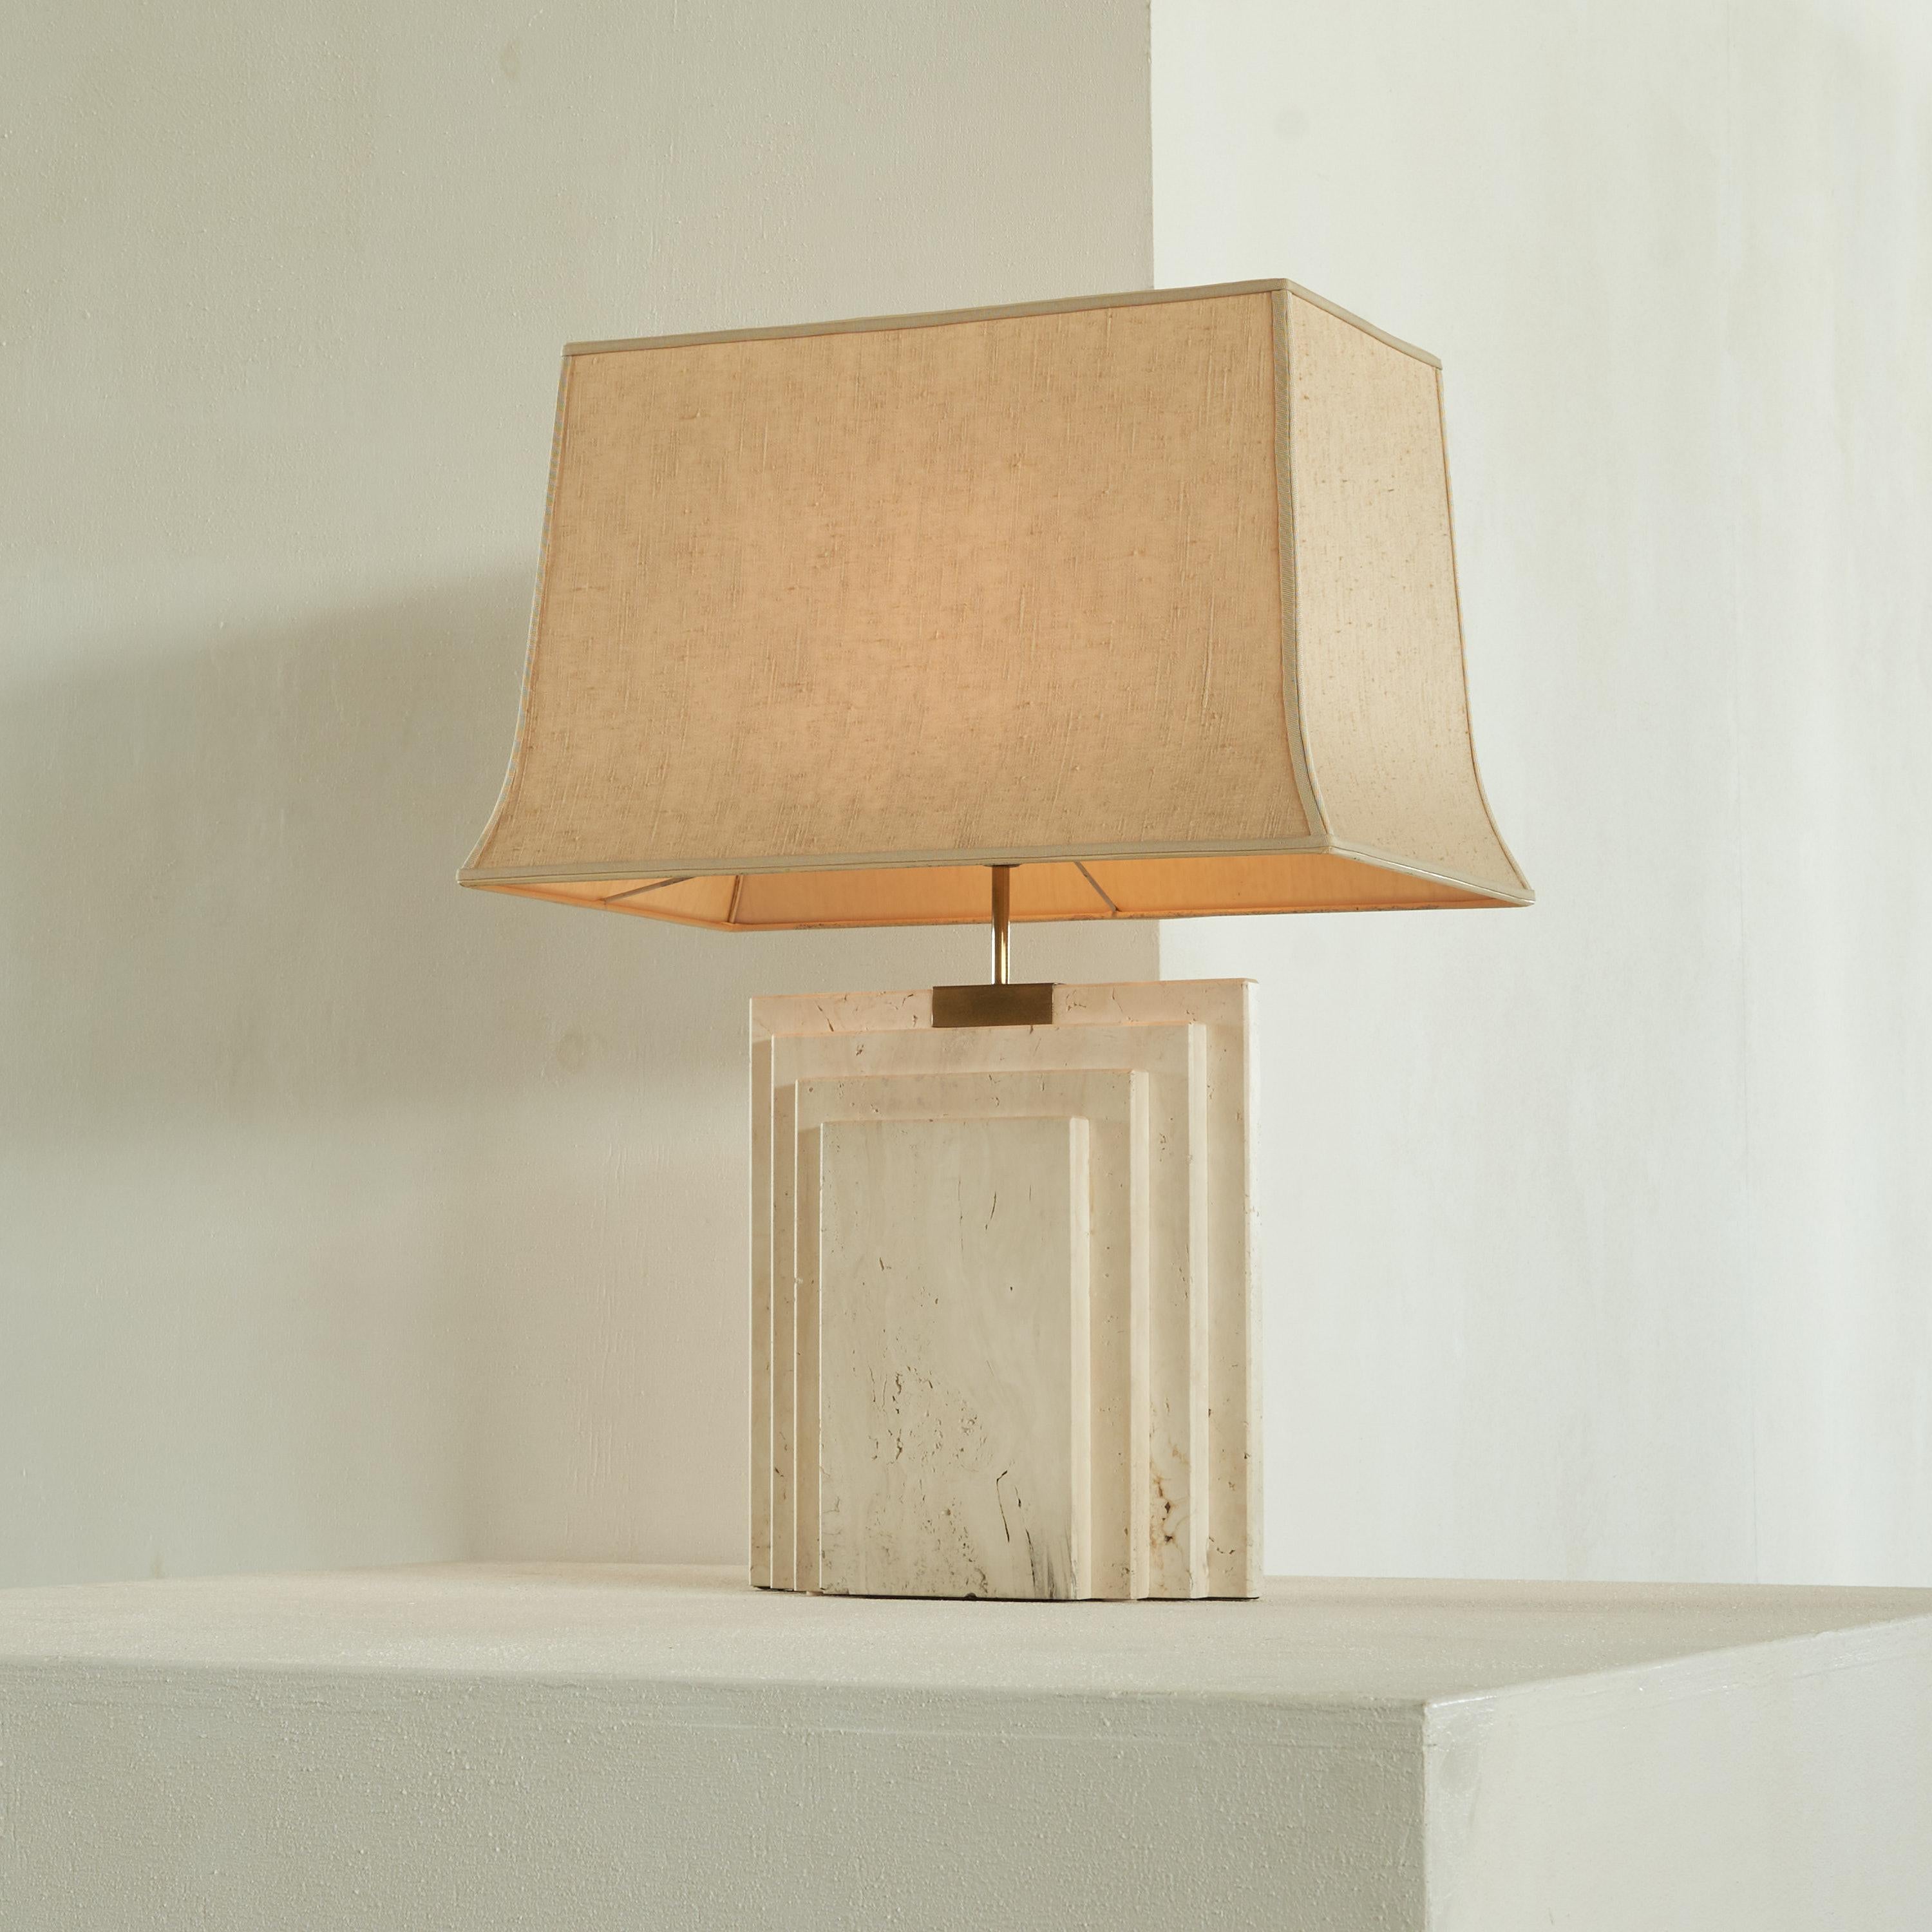 Hand-Crafted Architectural Table Lamp in Travertine and Brass, Belgium, 1970s For Sale